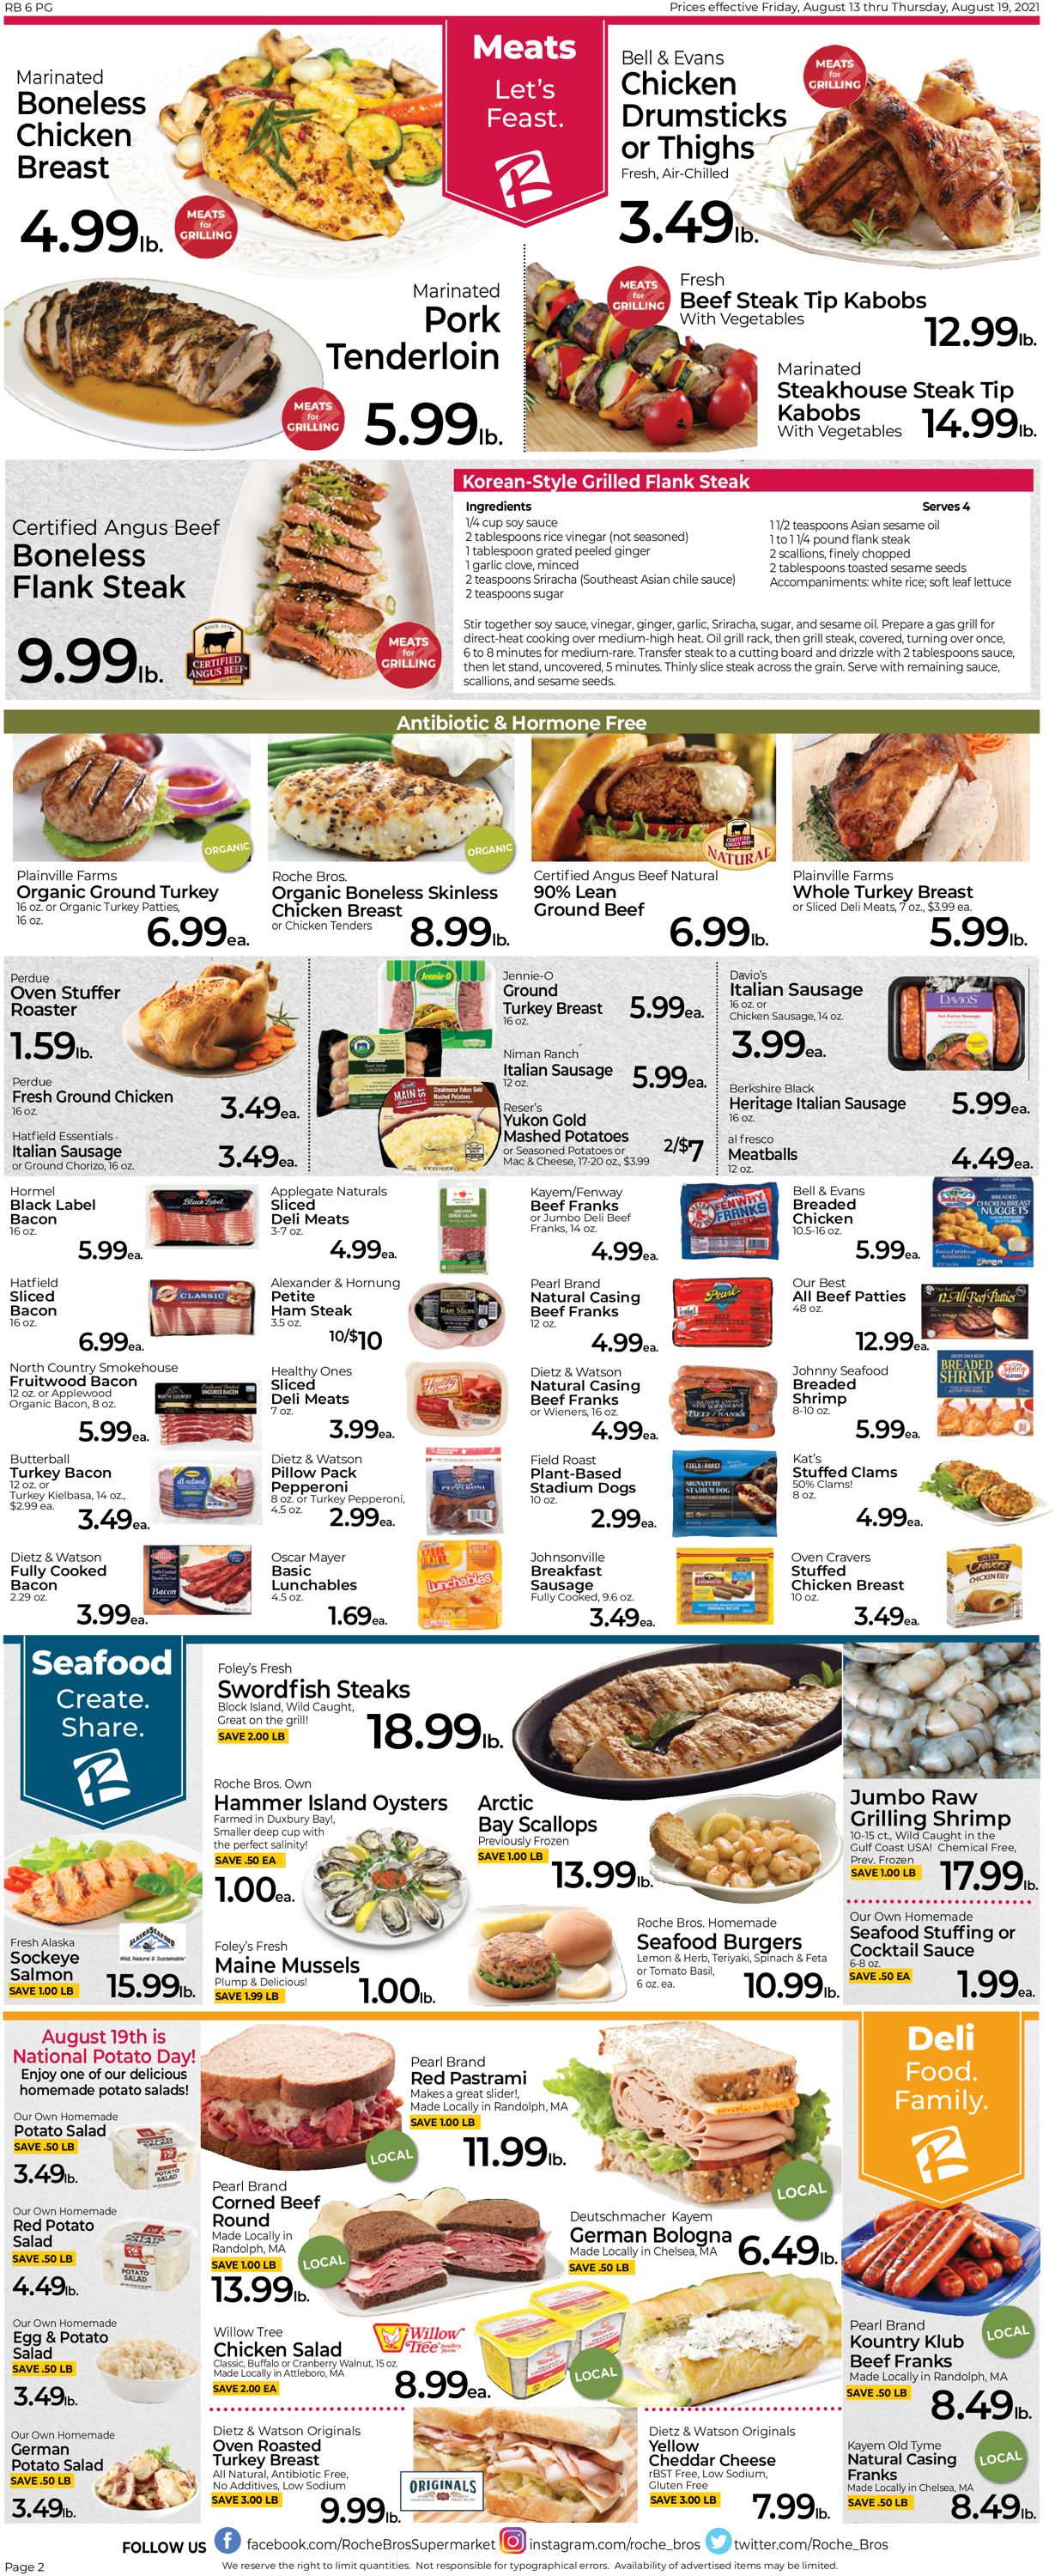 Catalogue Roche Bros. Supermarkets from 08/13/2021